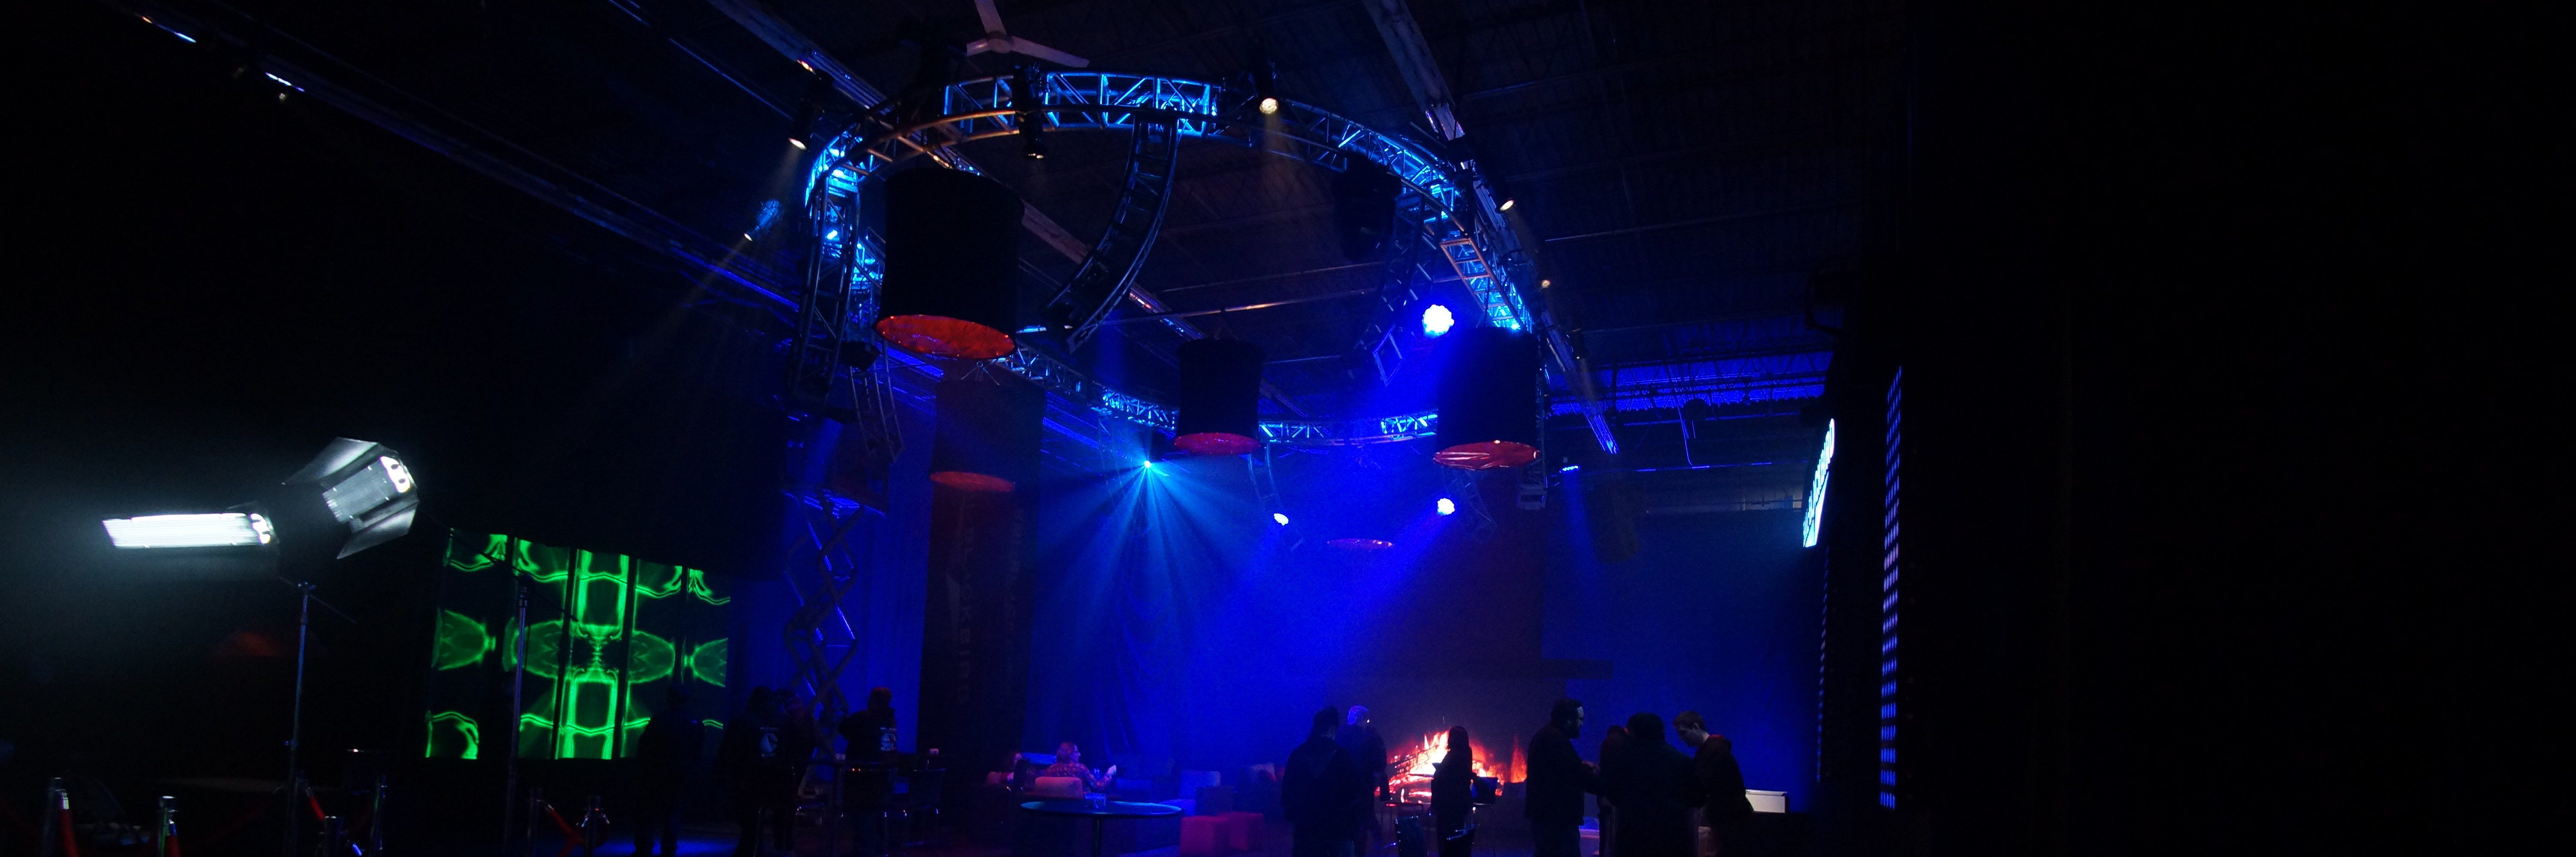 Technical Event Production Companies NYC